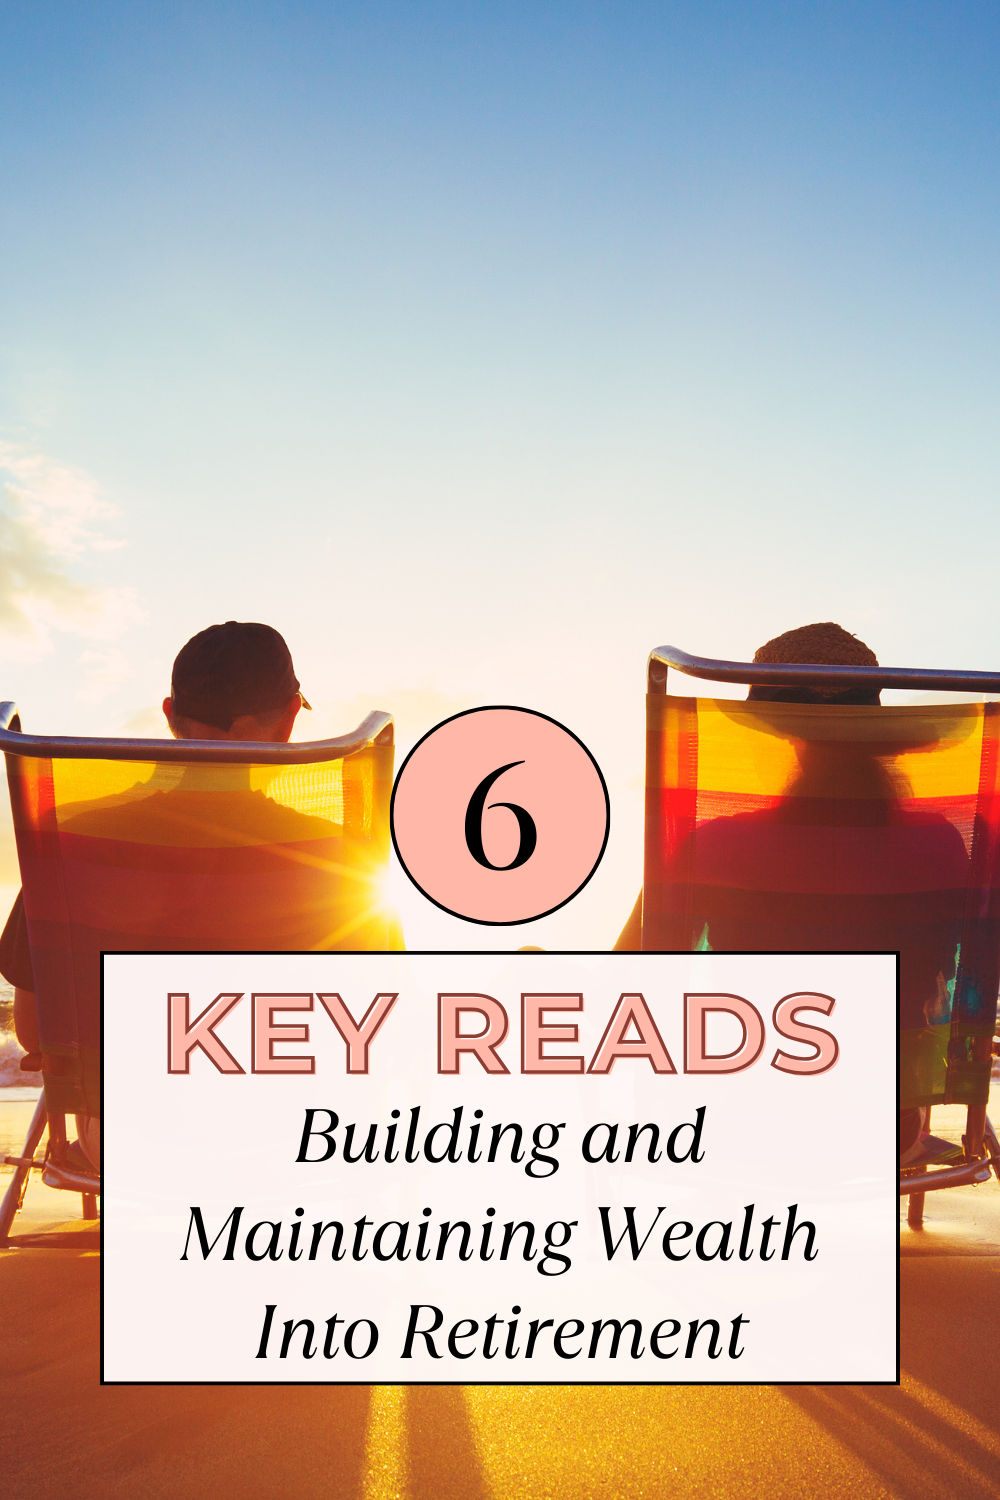 6 Key Reads on Building and Maintaining Wealth Into Retirement